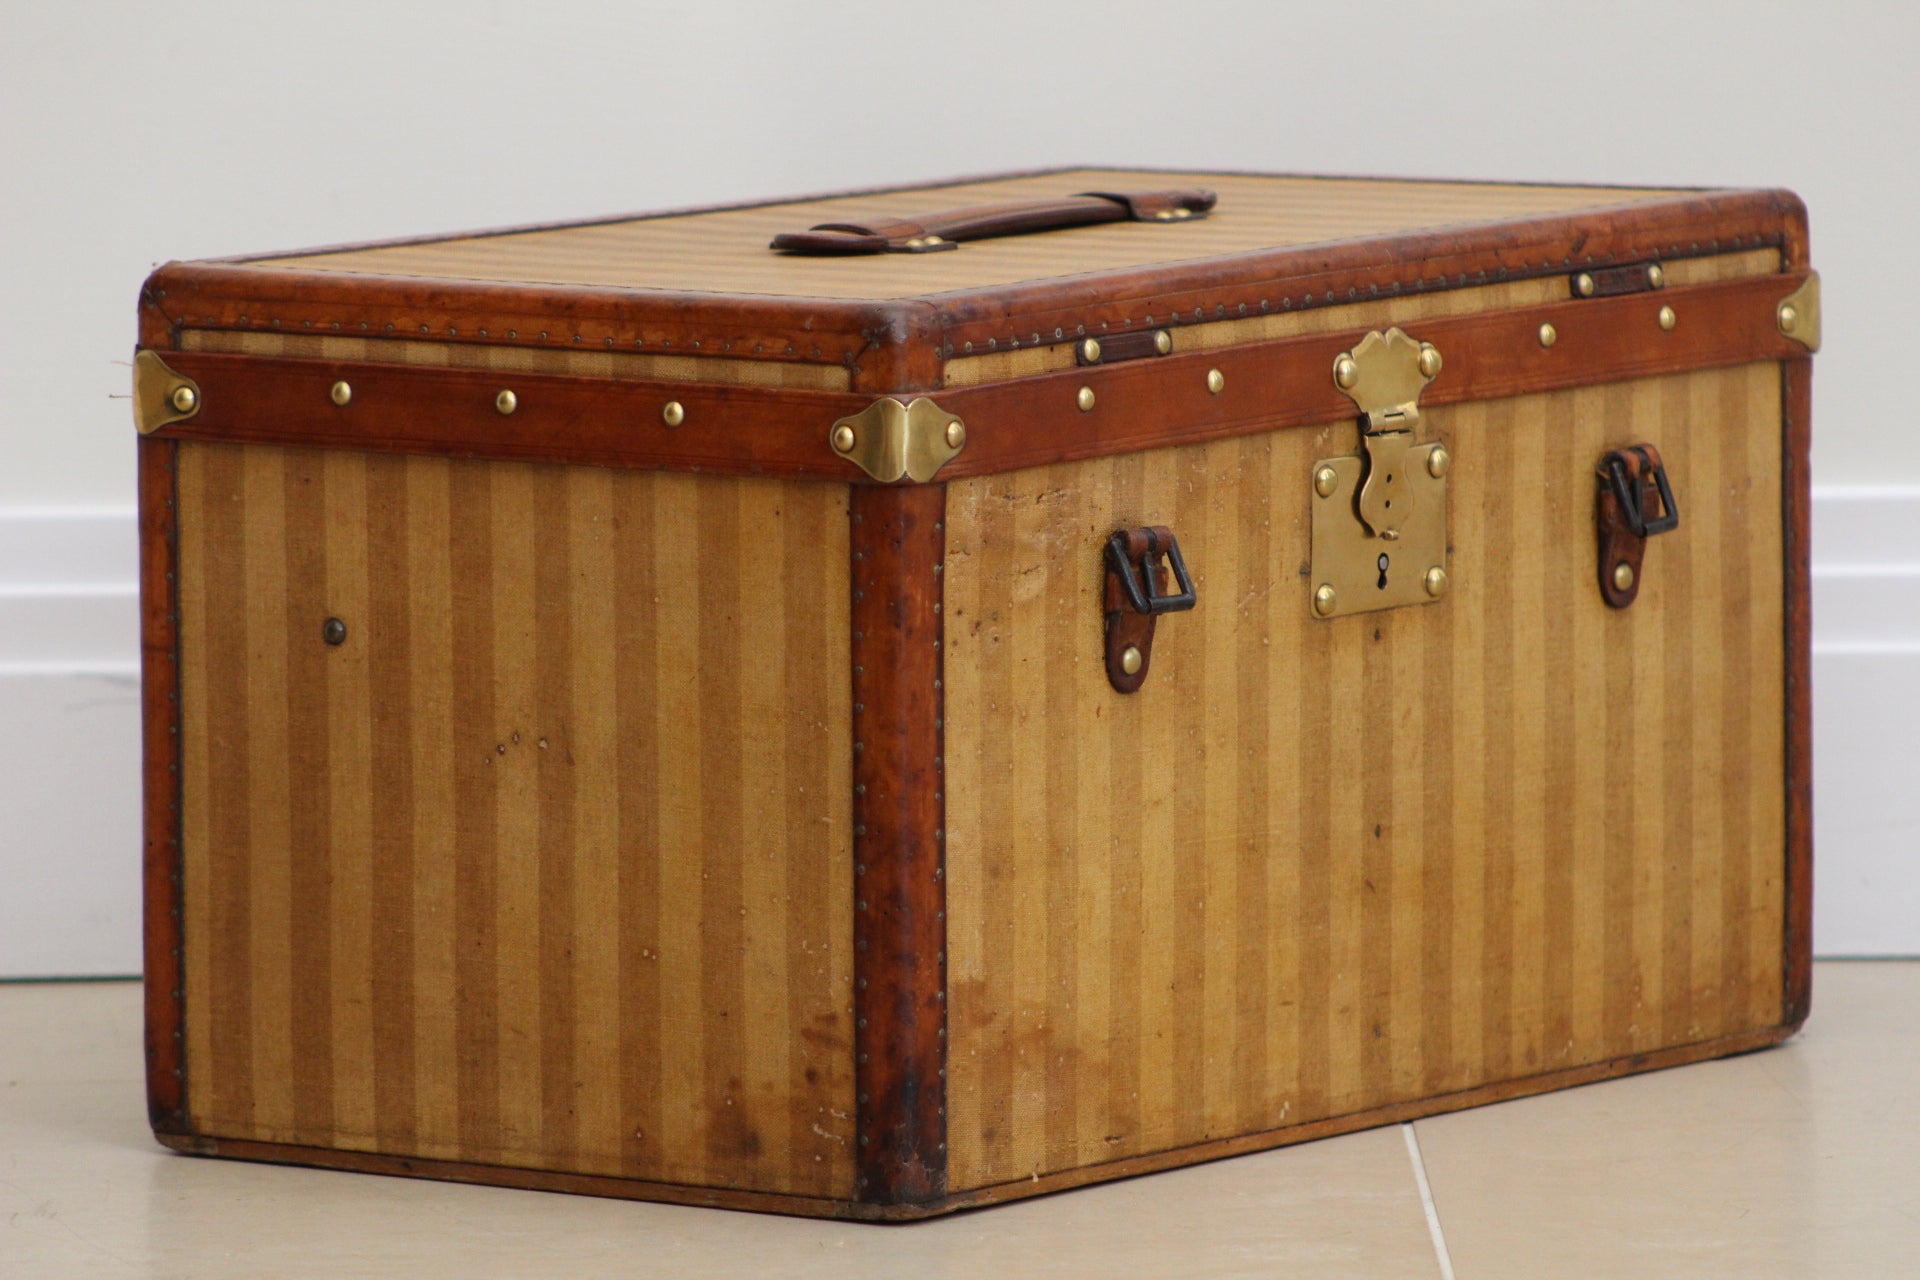 Louis Vuitton steamer trunk in London sale - Antique Collecting